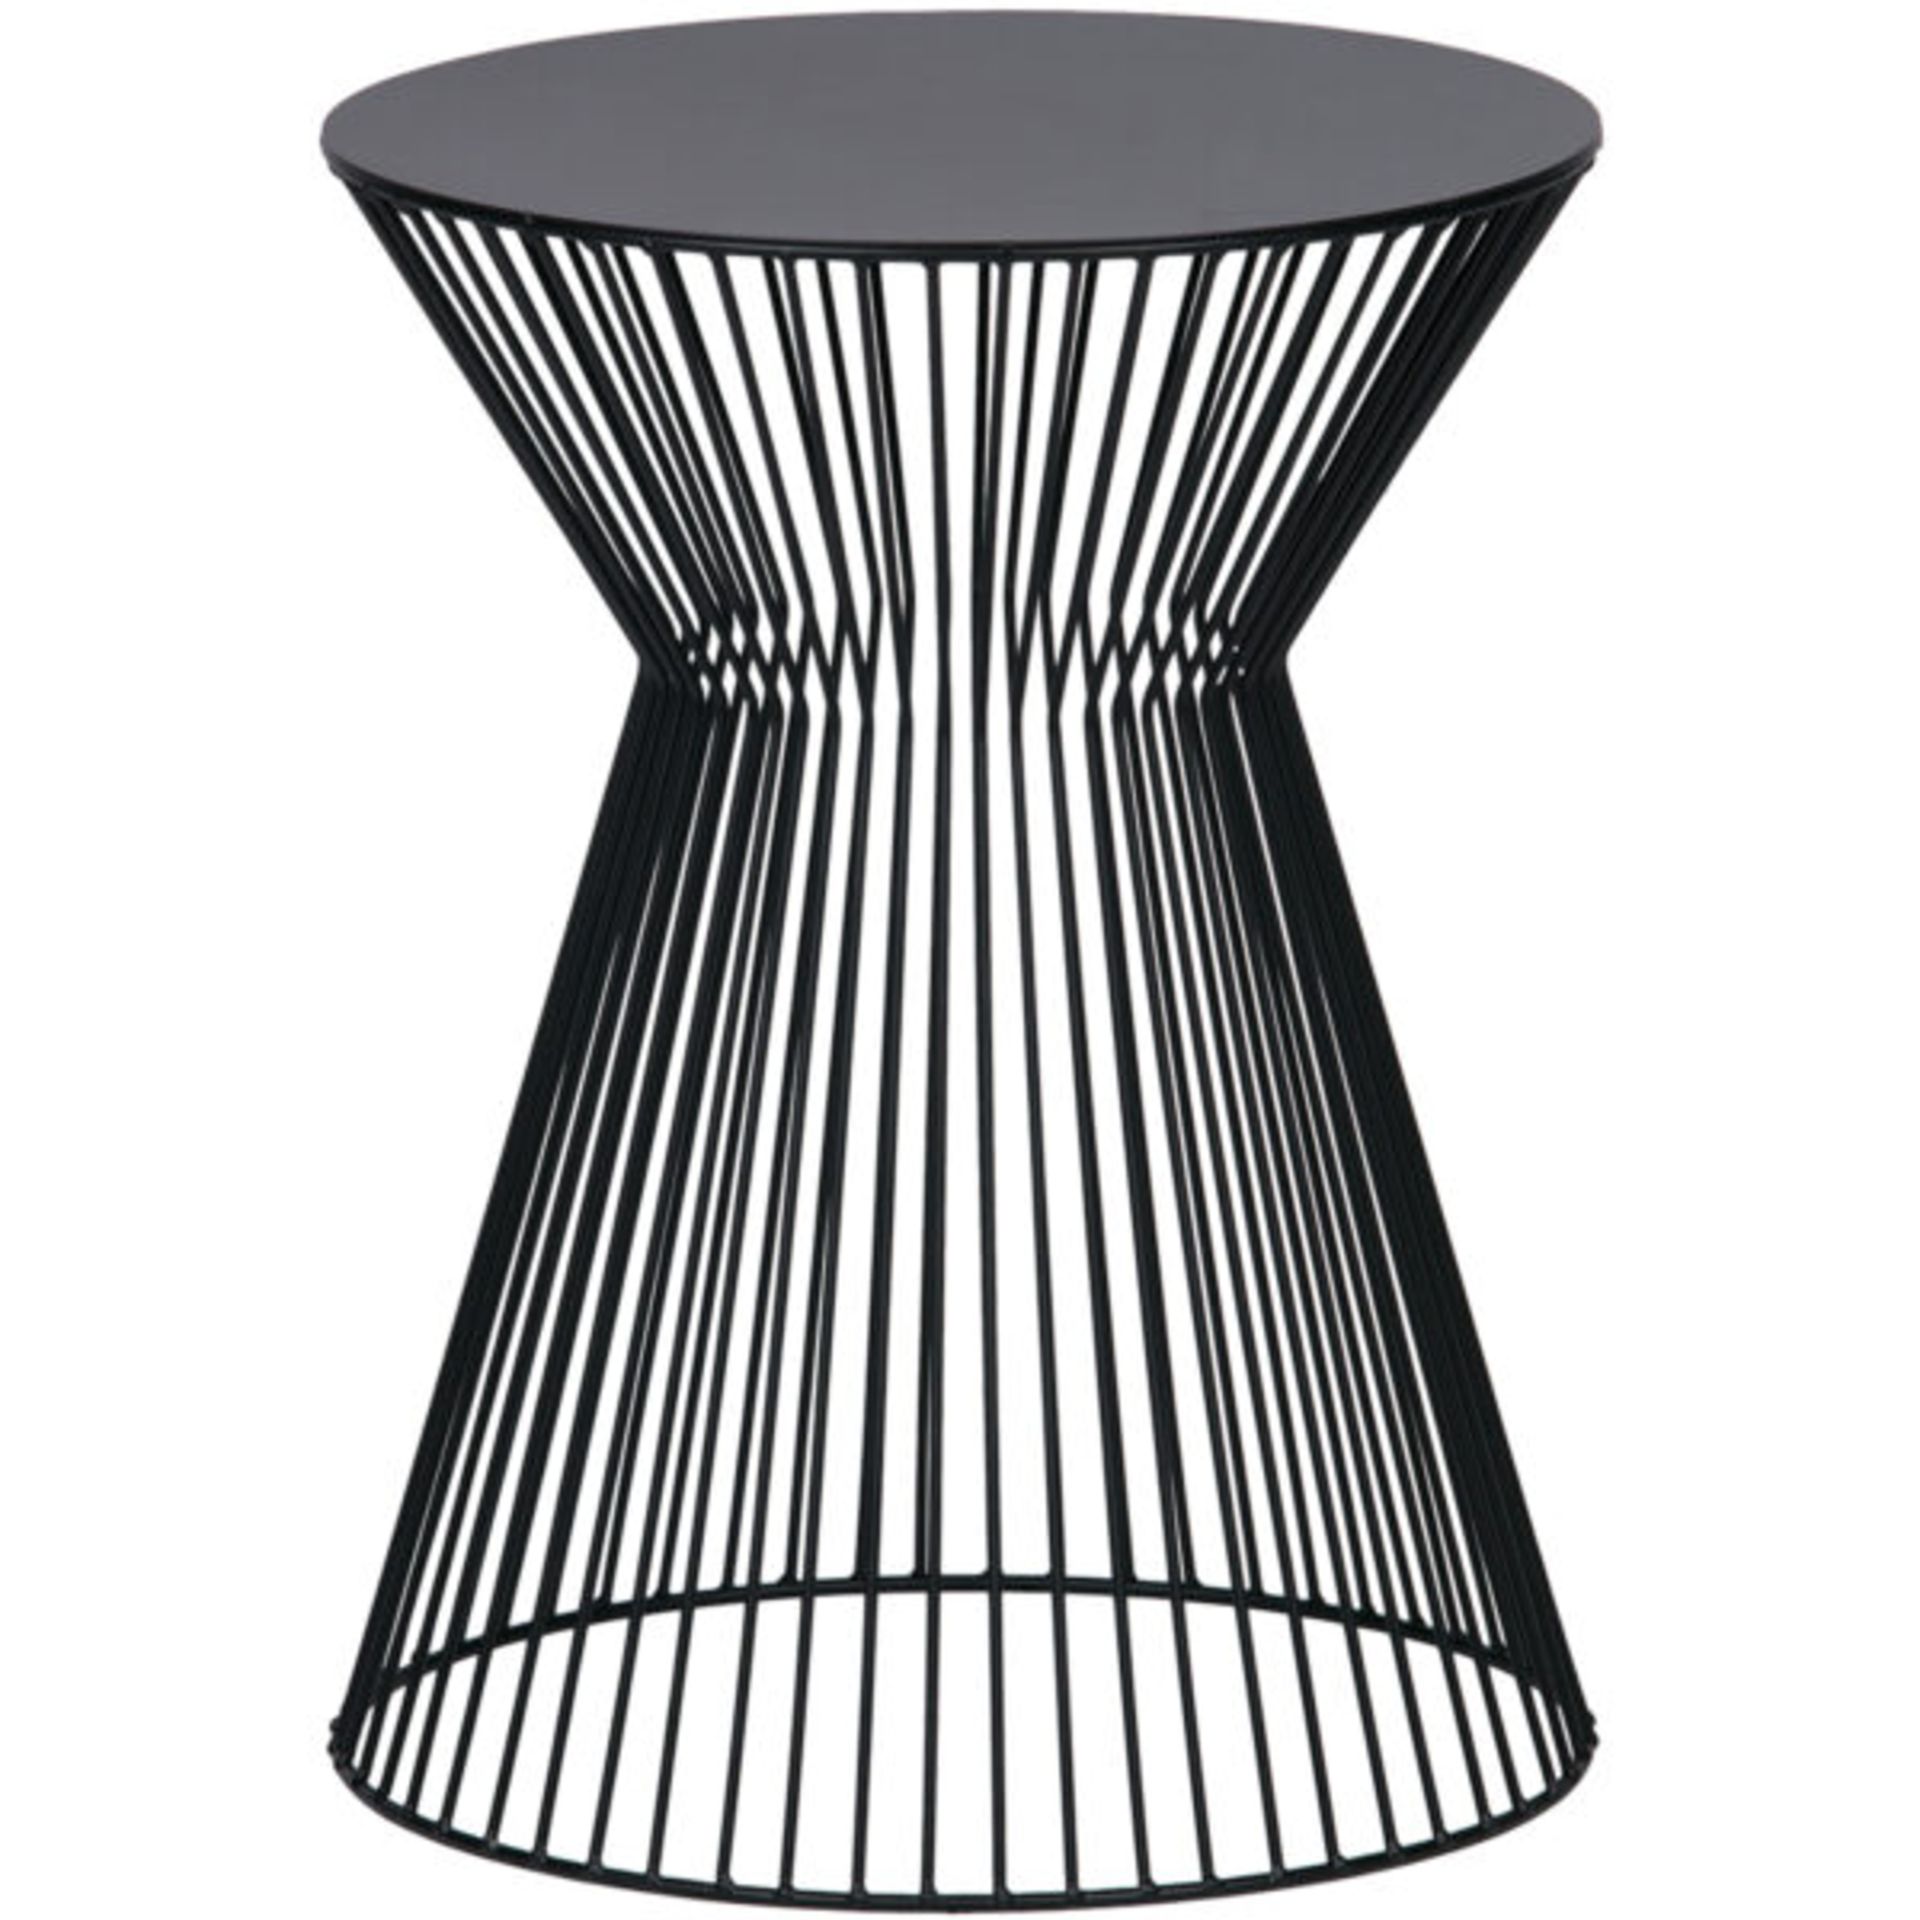 1 x 'Suus' Contemporary Diabalo Style Openwork Metal SIDE Table In Black - Brand New Boxed Stock - Image 3 of 3